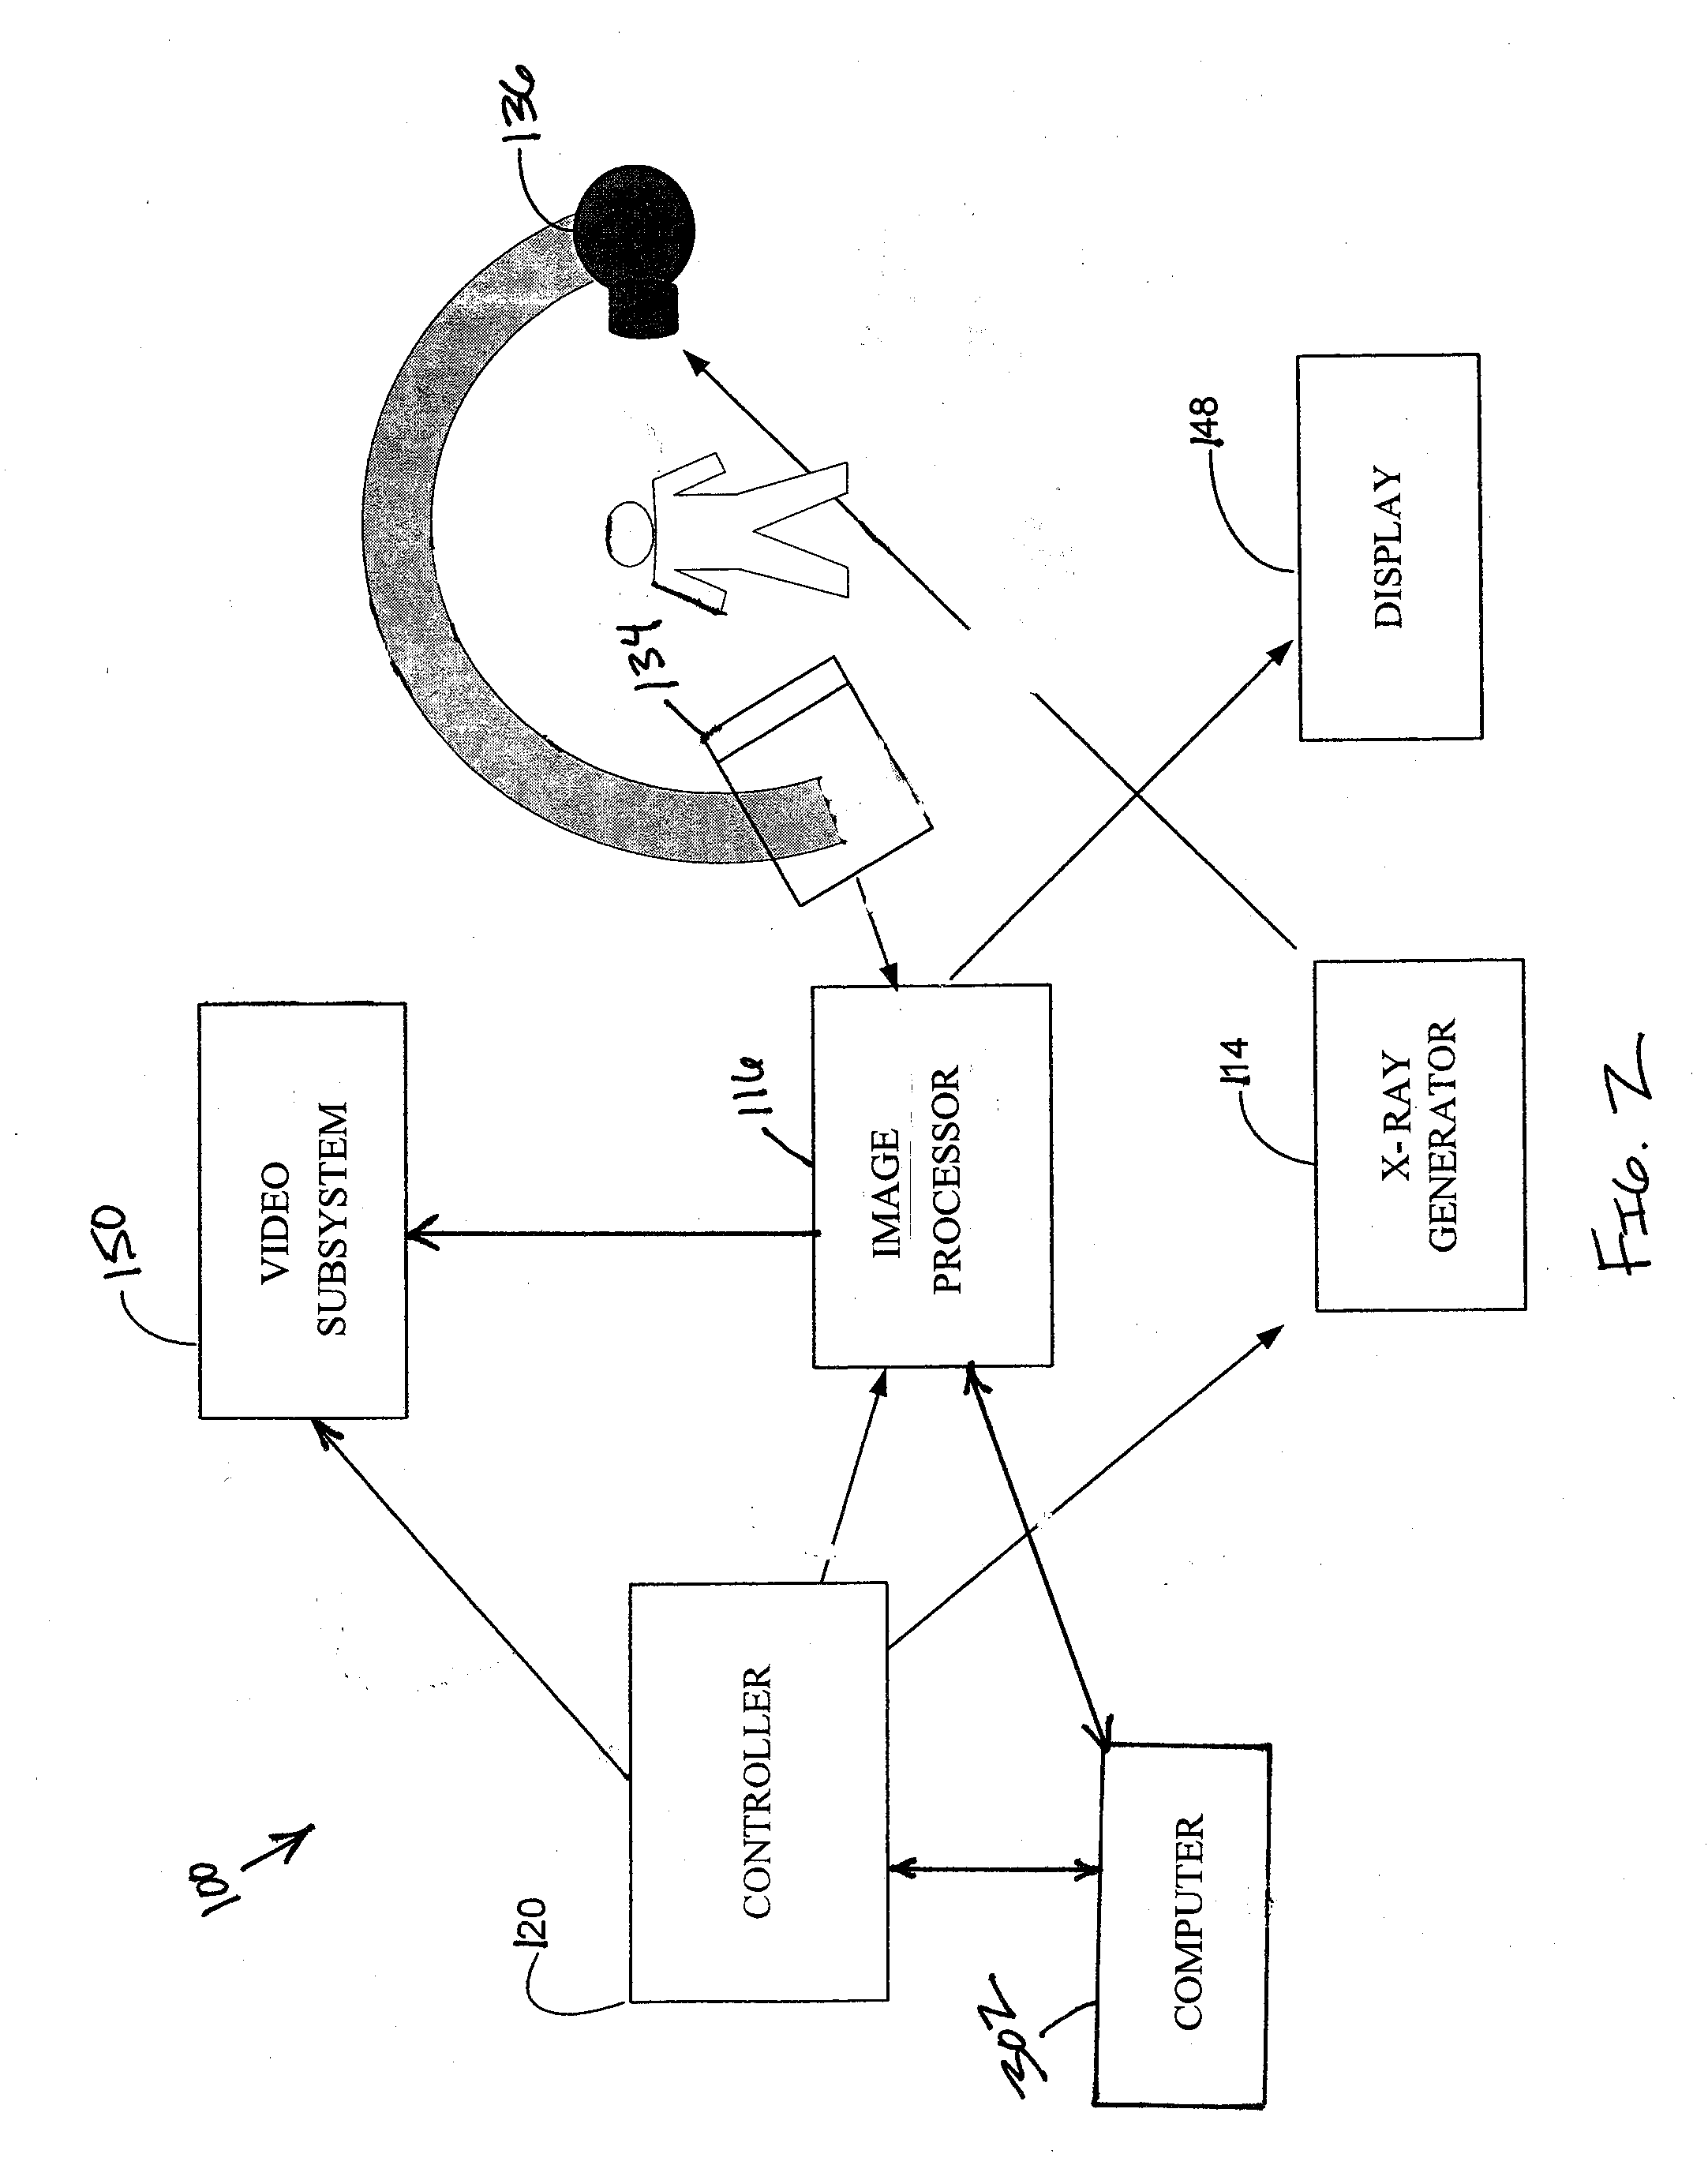 System and method for video capture for fluoroscopy and navigation